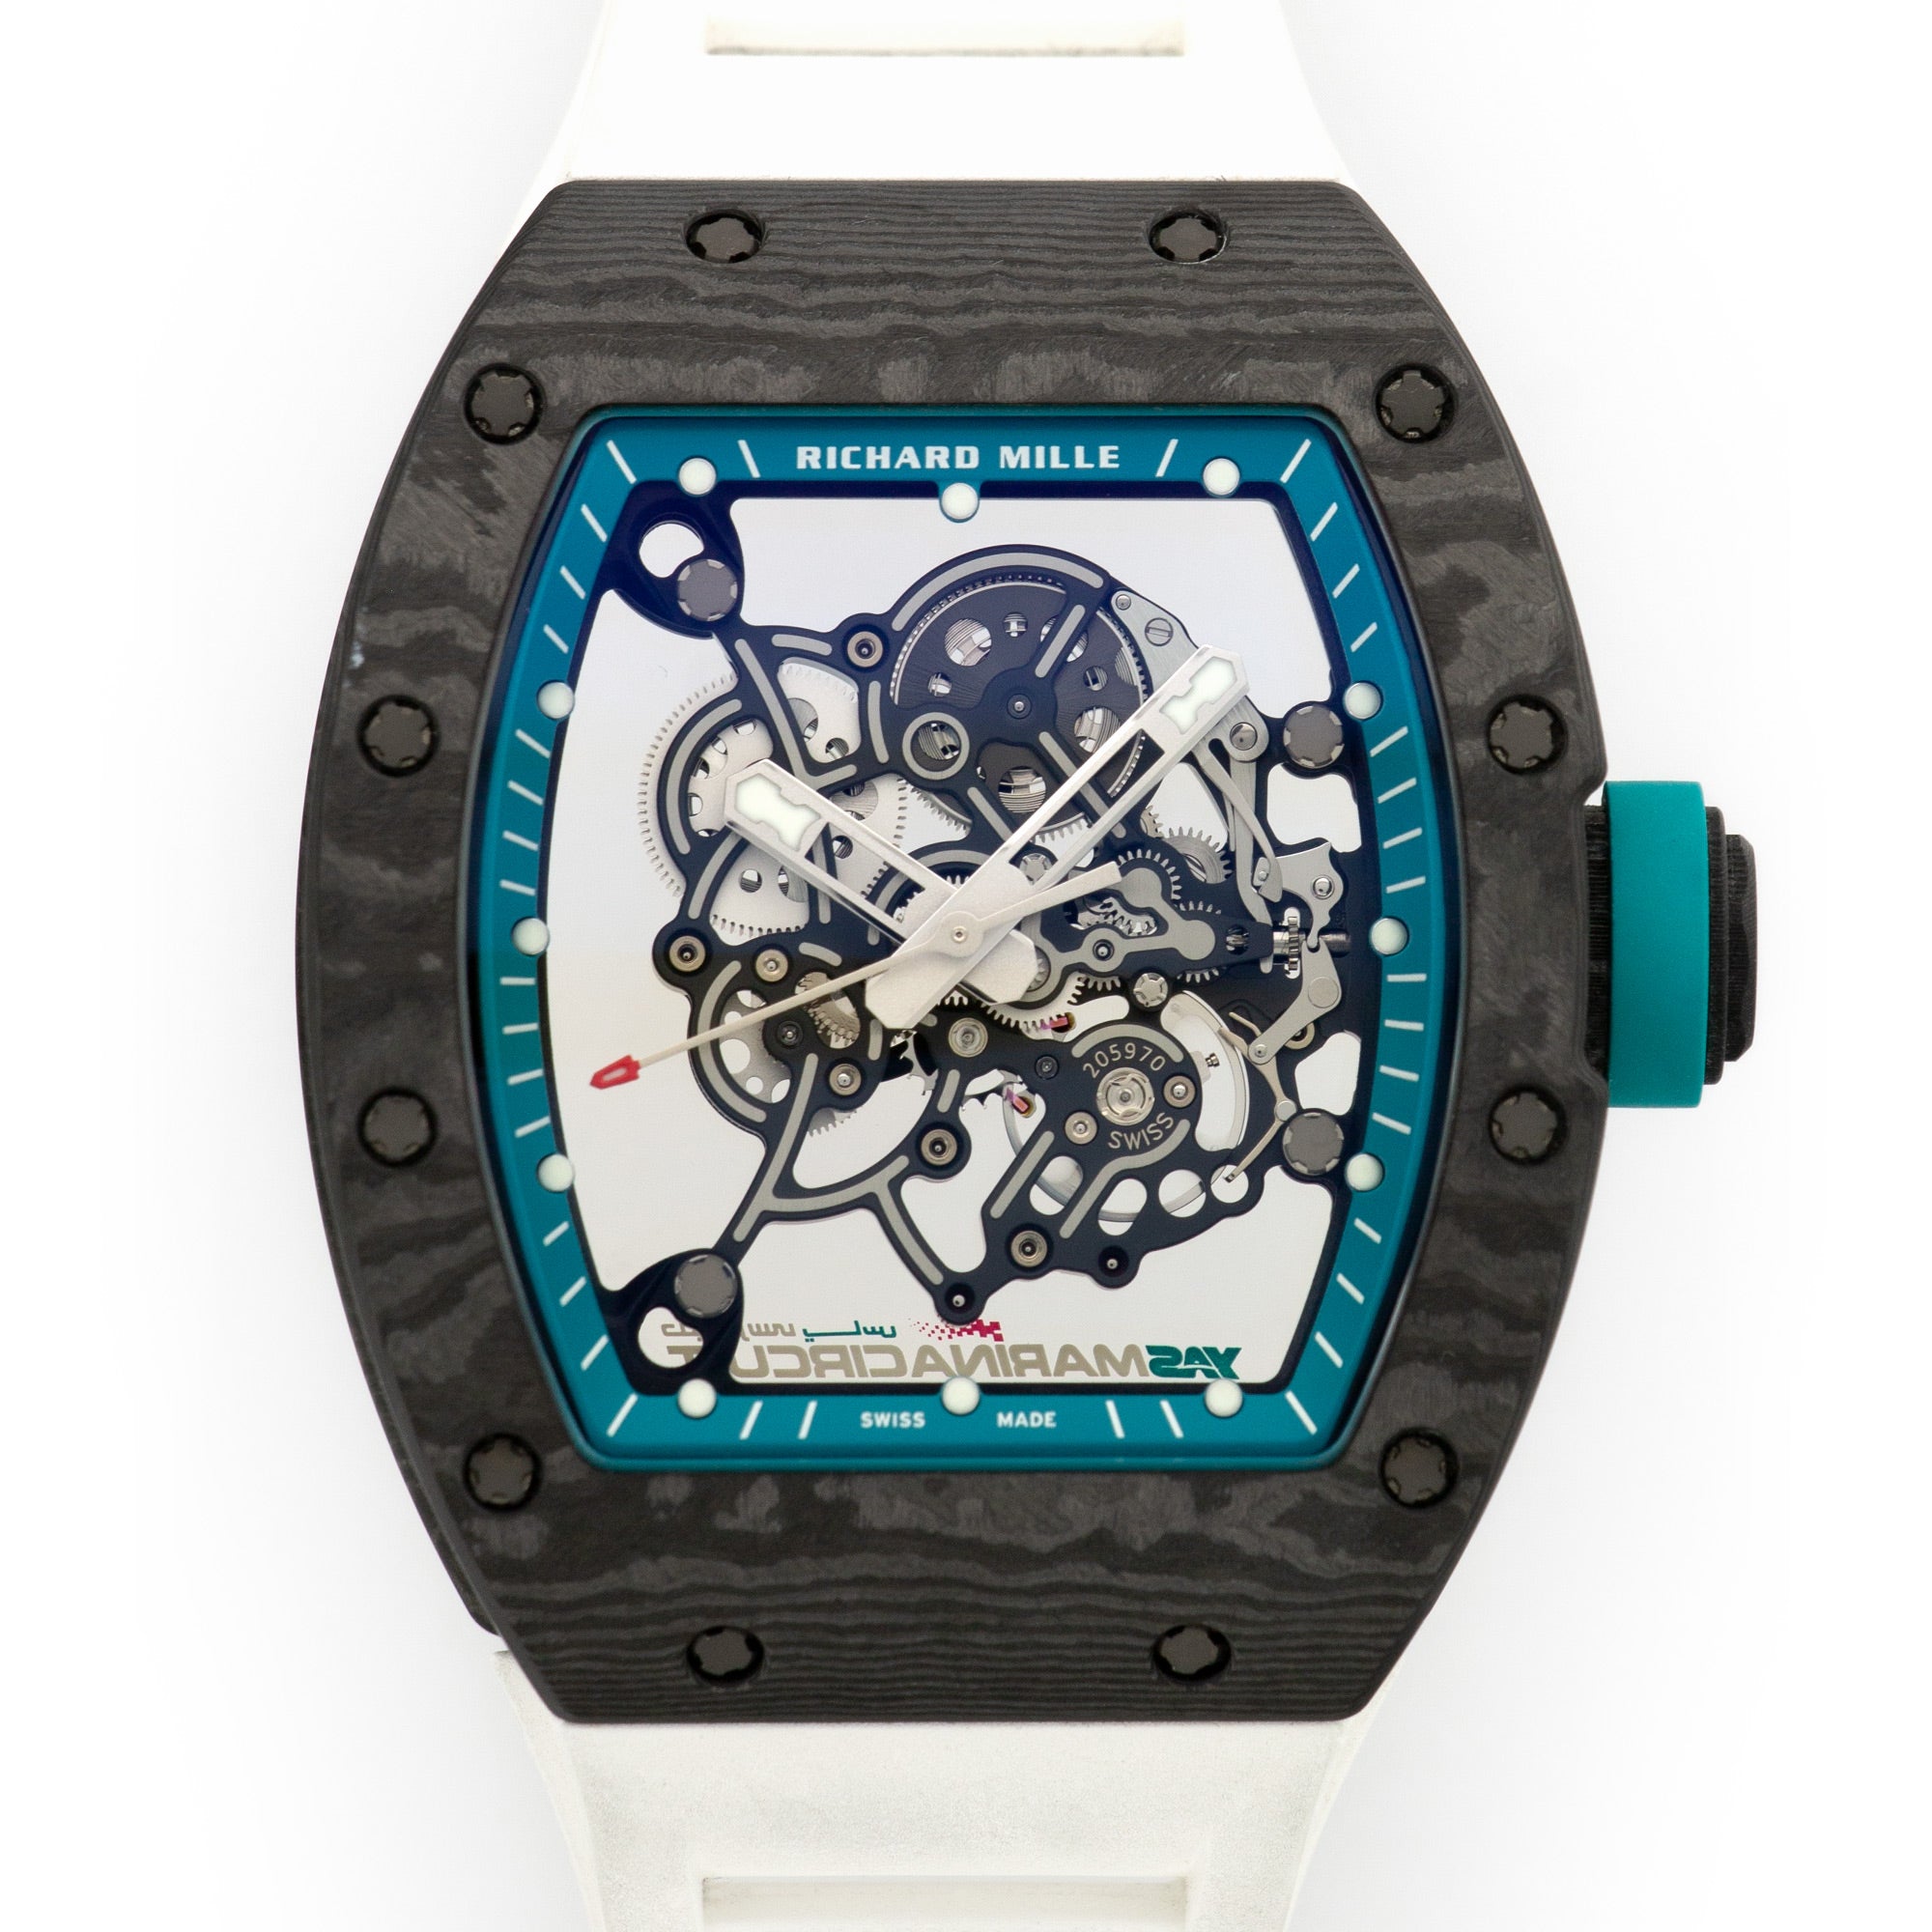 Richard Mille - Richard Mille Carbon Yas Marina Circuit Watch Ref. RM055 - The Keystone Watches